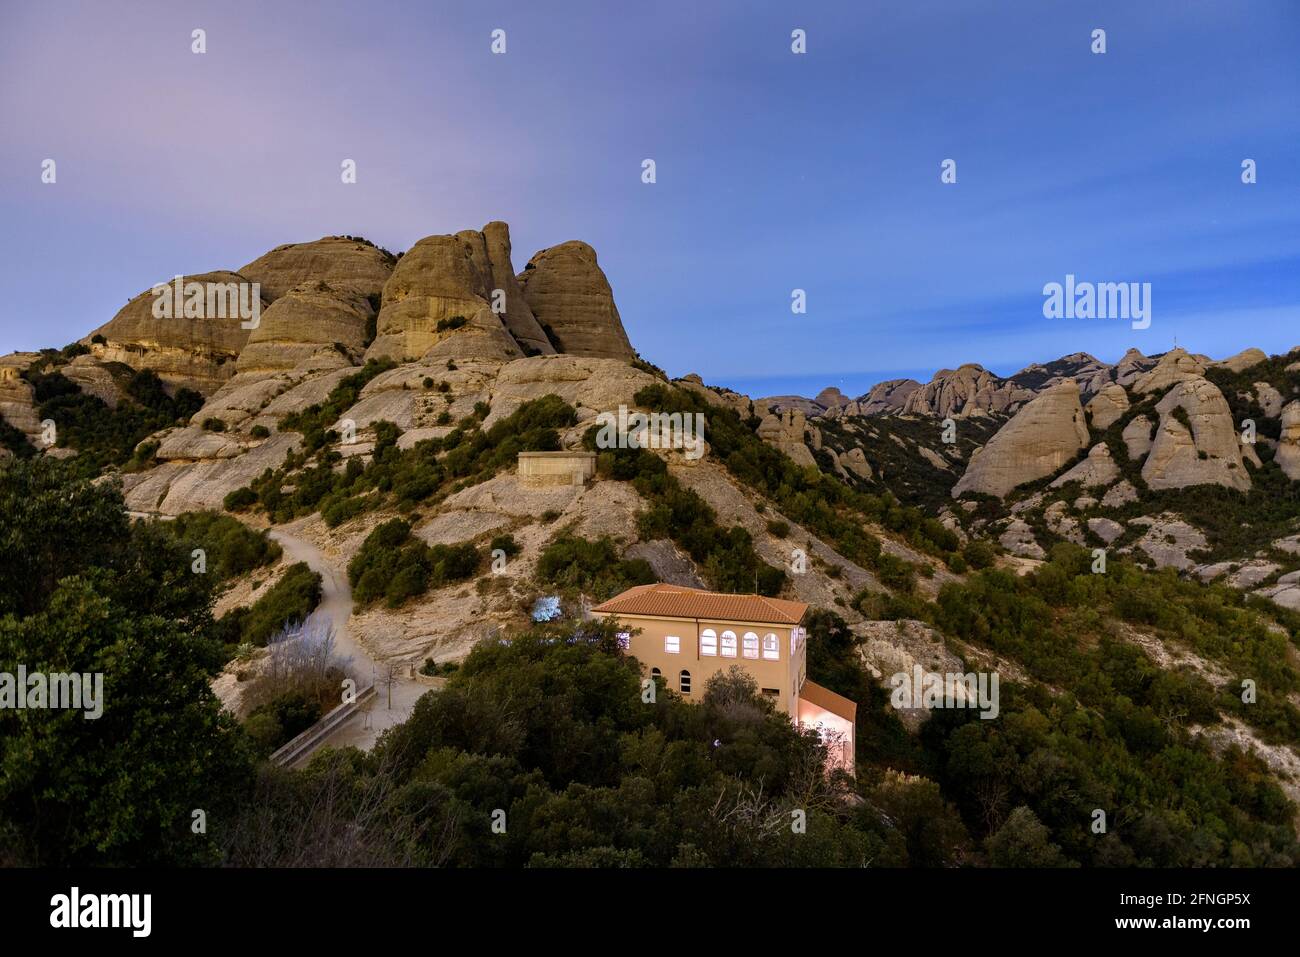 Montserrat mountain at night, seen from the upper station of the Sant Joan funicular (Barcelona, Catalonia, Spain) Stock Photo